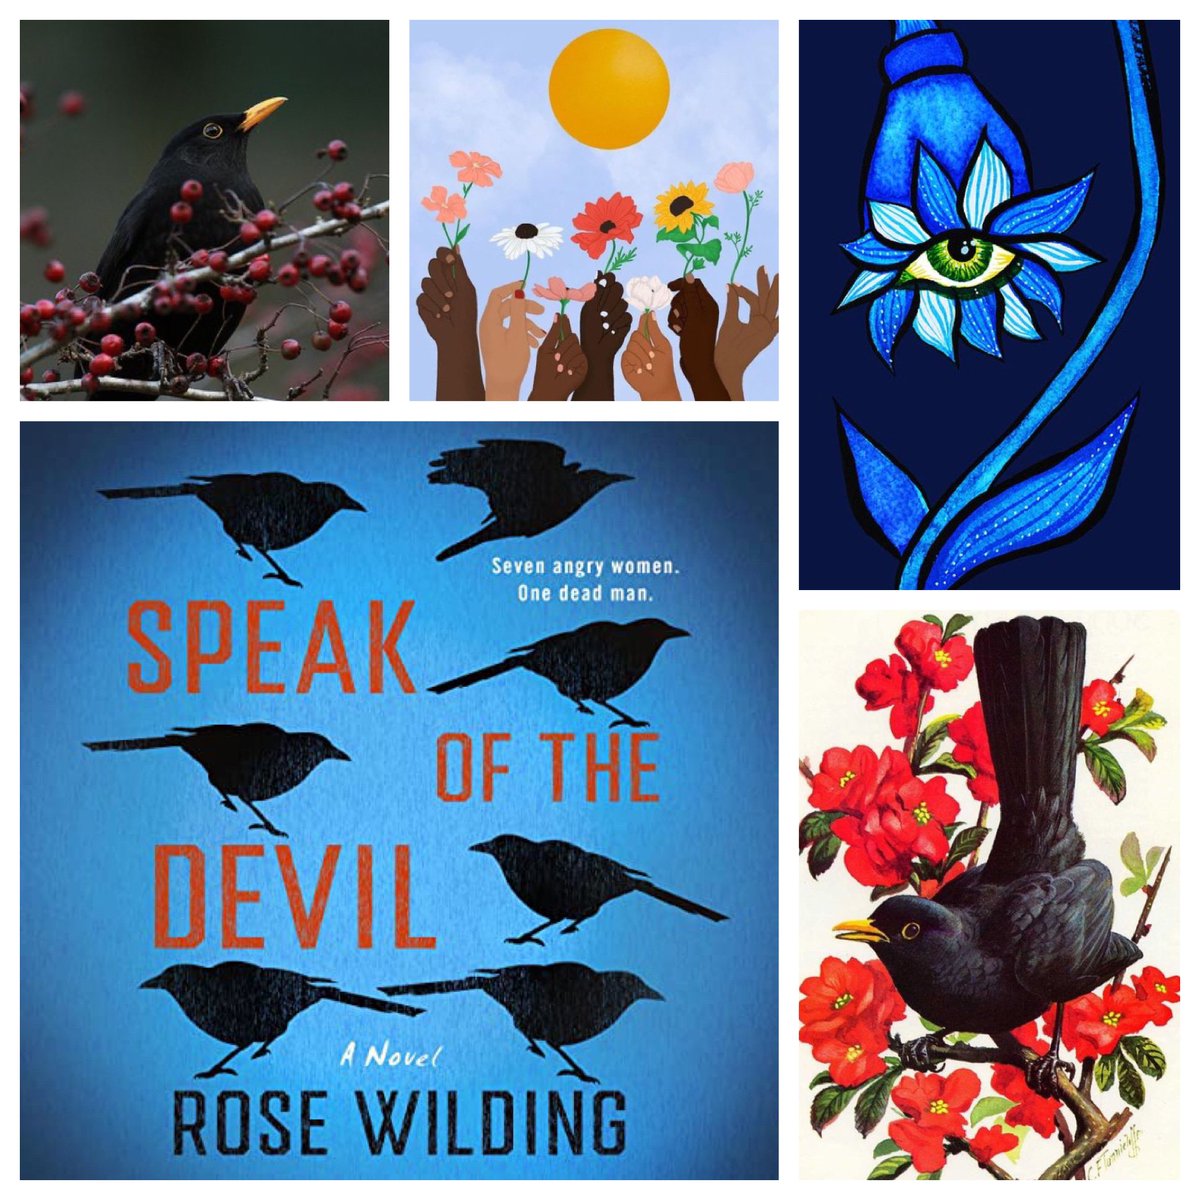 Thank you #StMartinsPress for adding #SpeakOfTheDevil by #RoseWilding to my TBR! Starting it today! To be published June 13! #NetGalley #BookTwitter